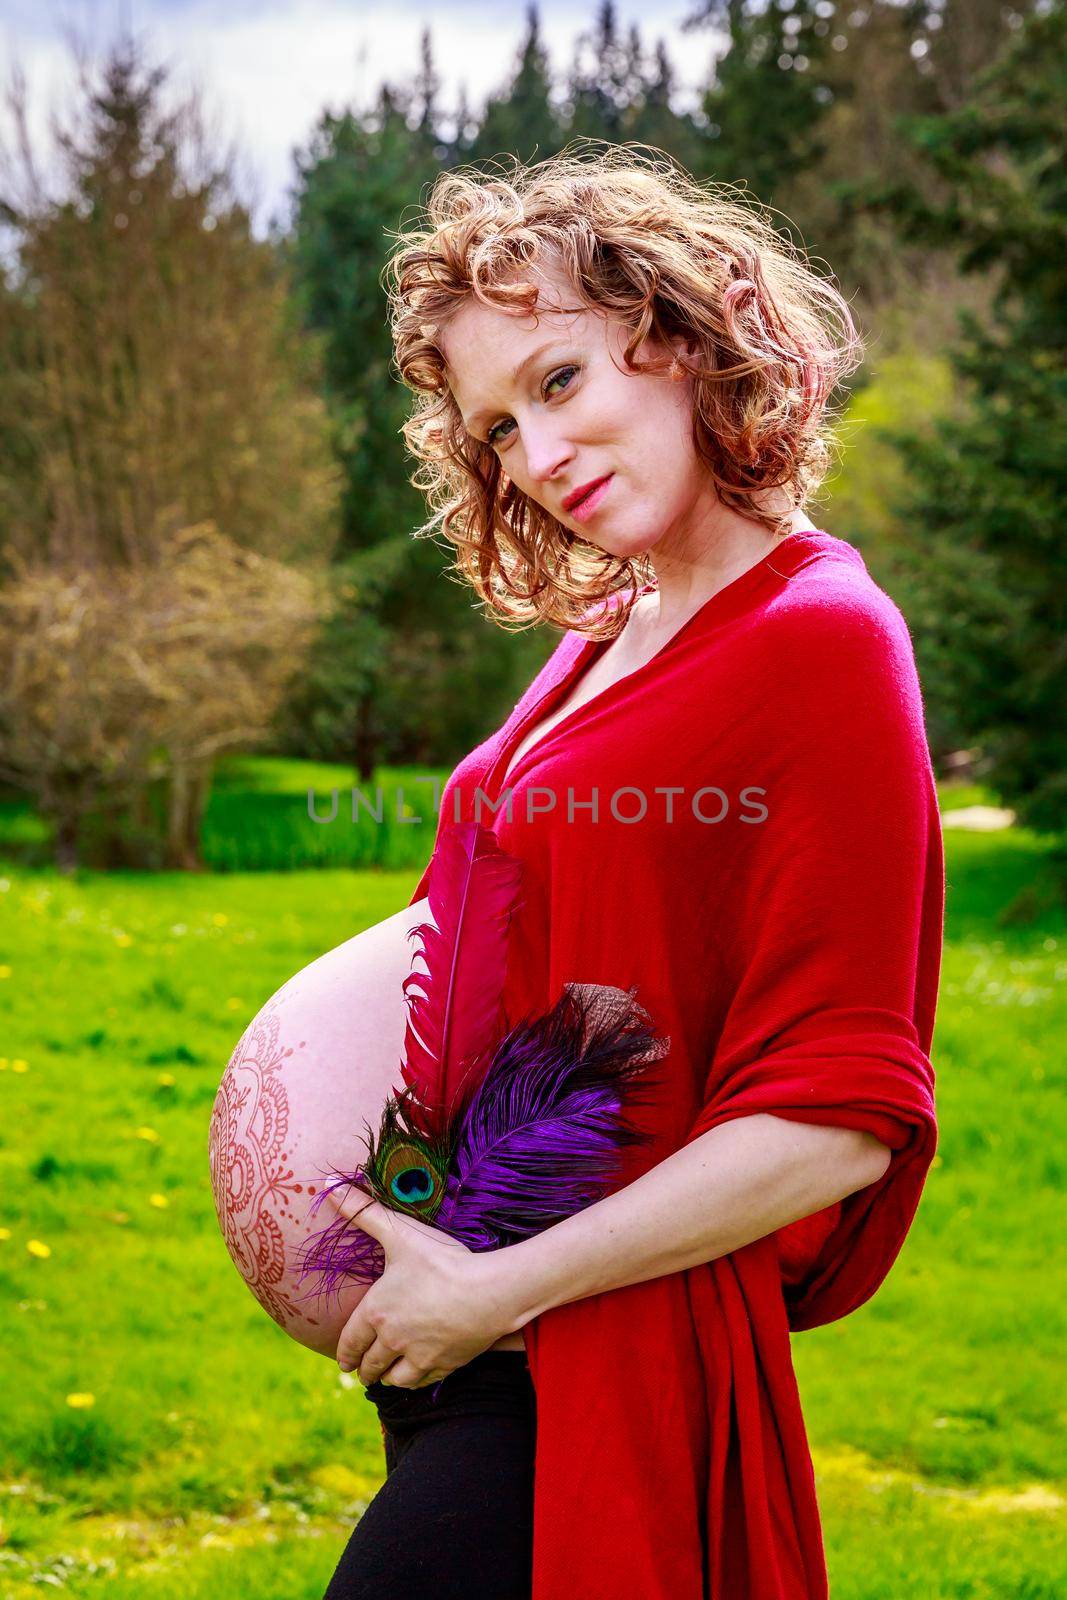 Young beautiful woman with pregnant belly showing.